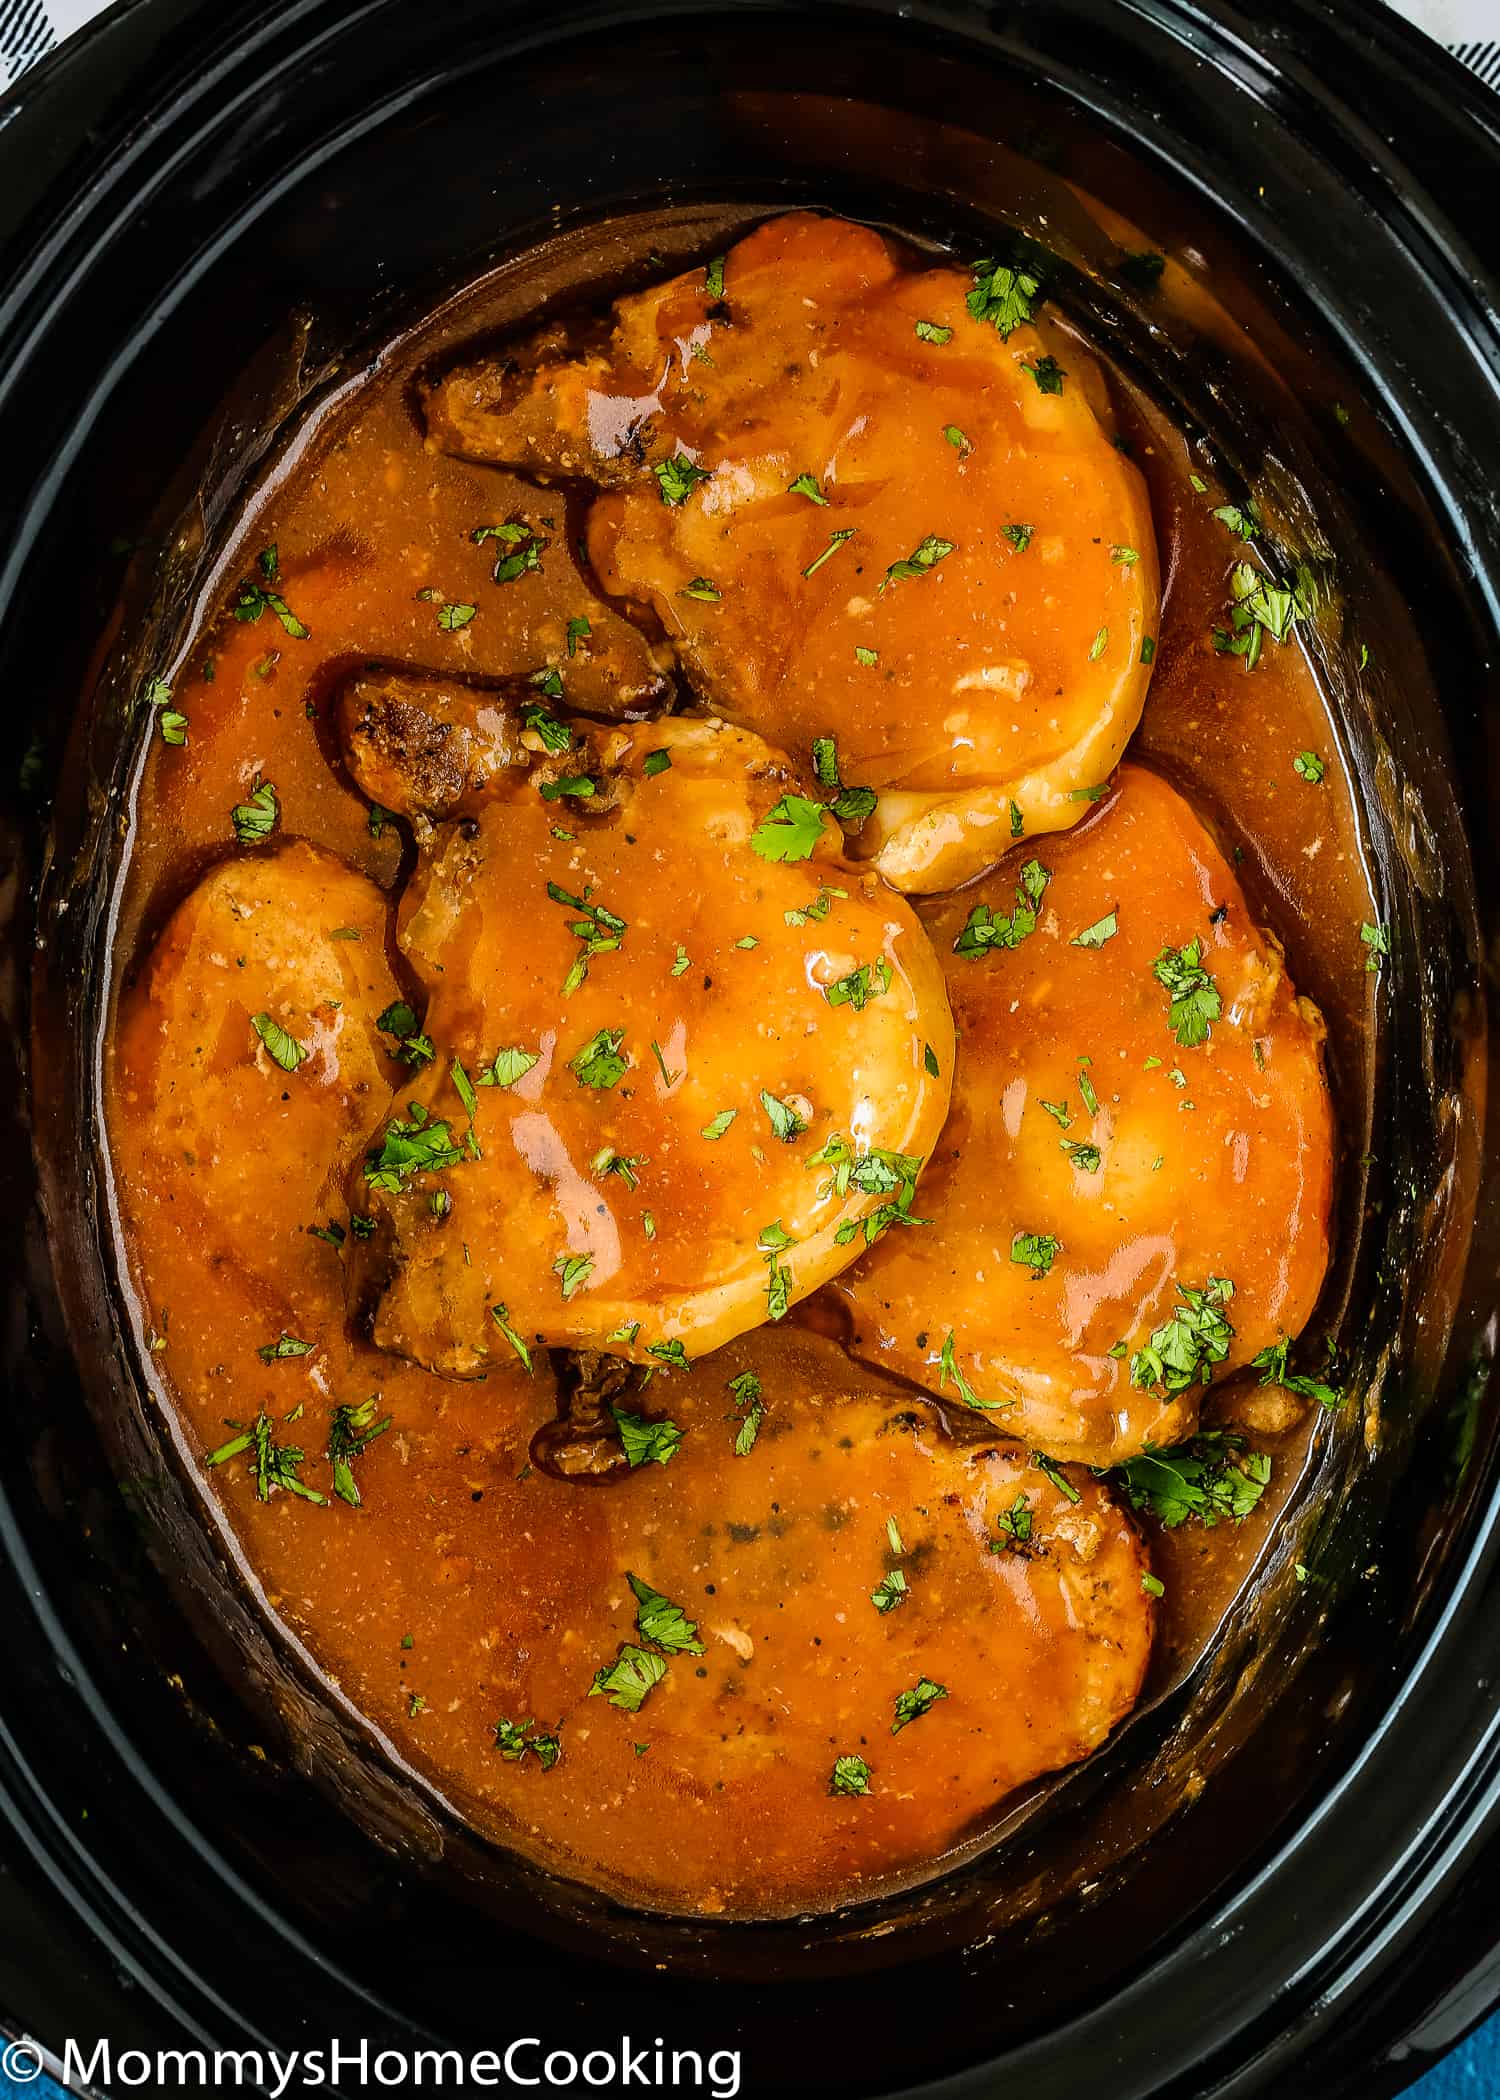 These Slow Cooker Beer Pork Chops are spectacularly delicious! This recipe results in tender, flavor-packed pork chops that taste like a million bucks. You can make this tonight with any pork chops or even CHICKEN! https://mommyshomecooking.com